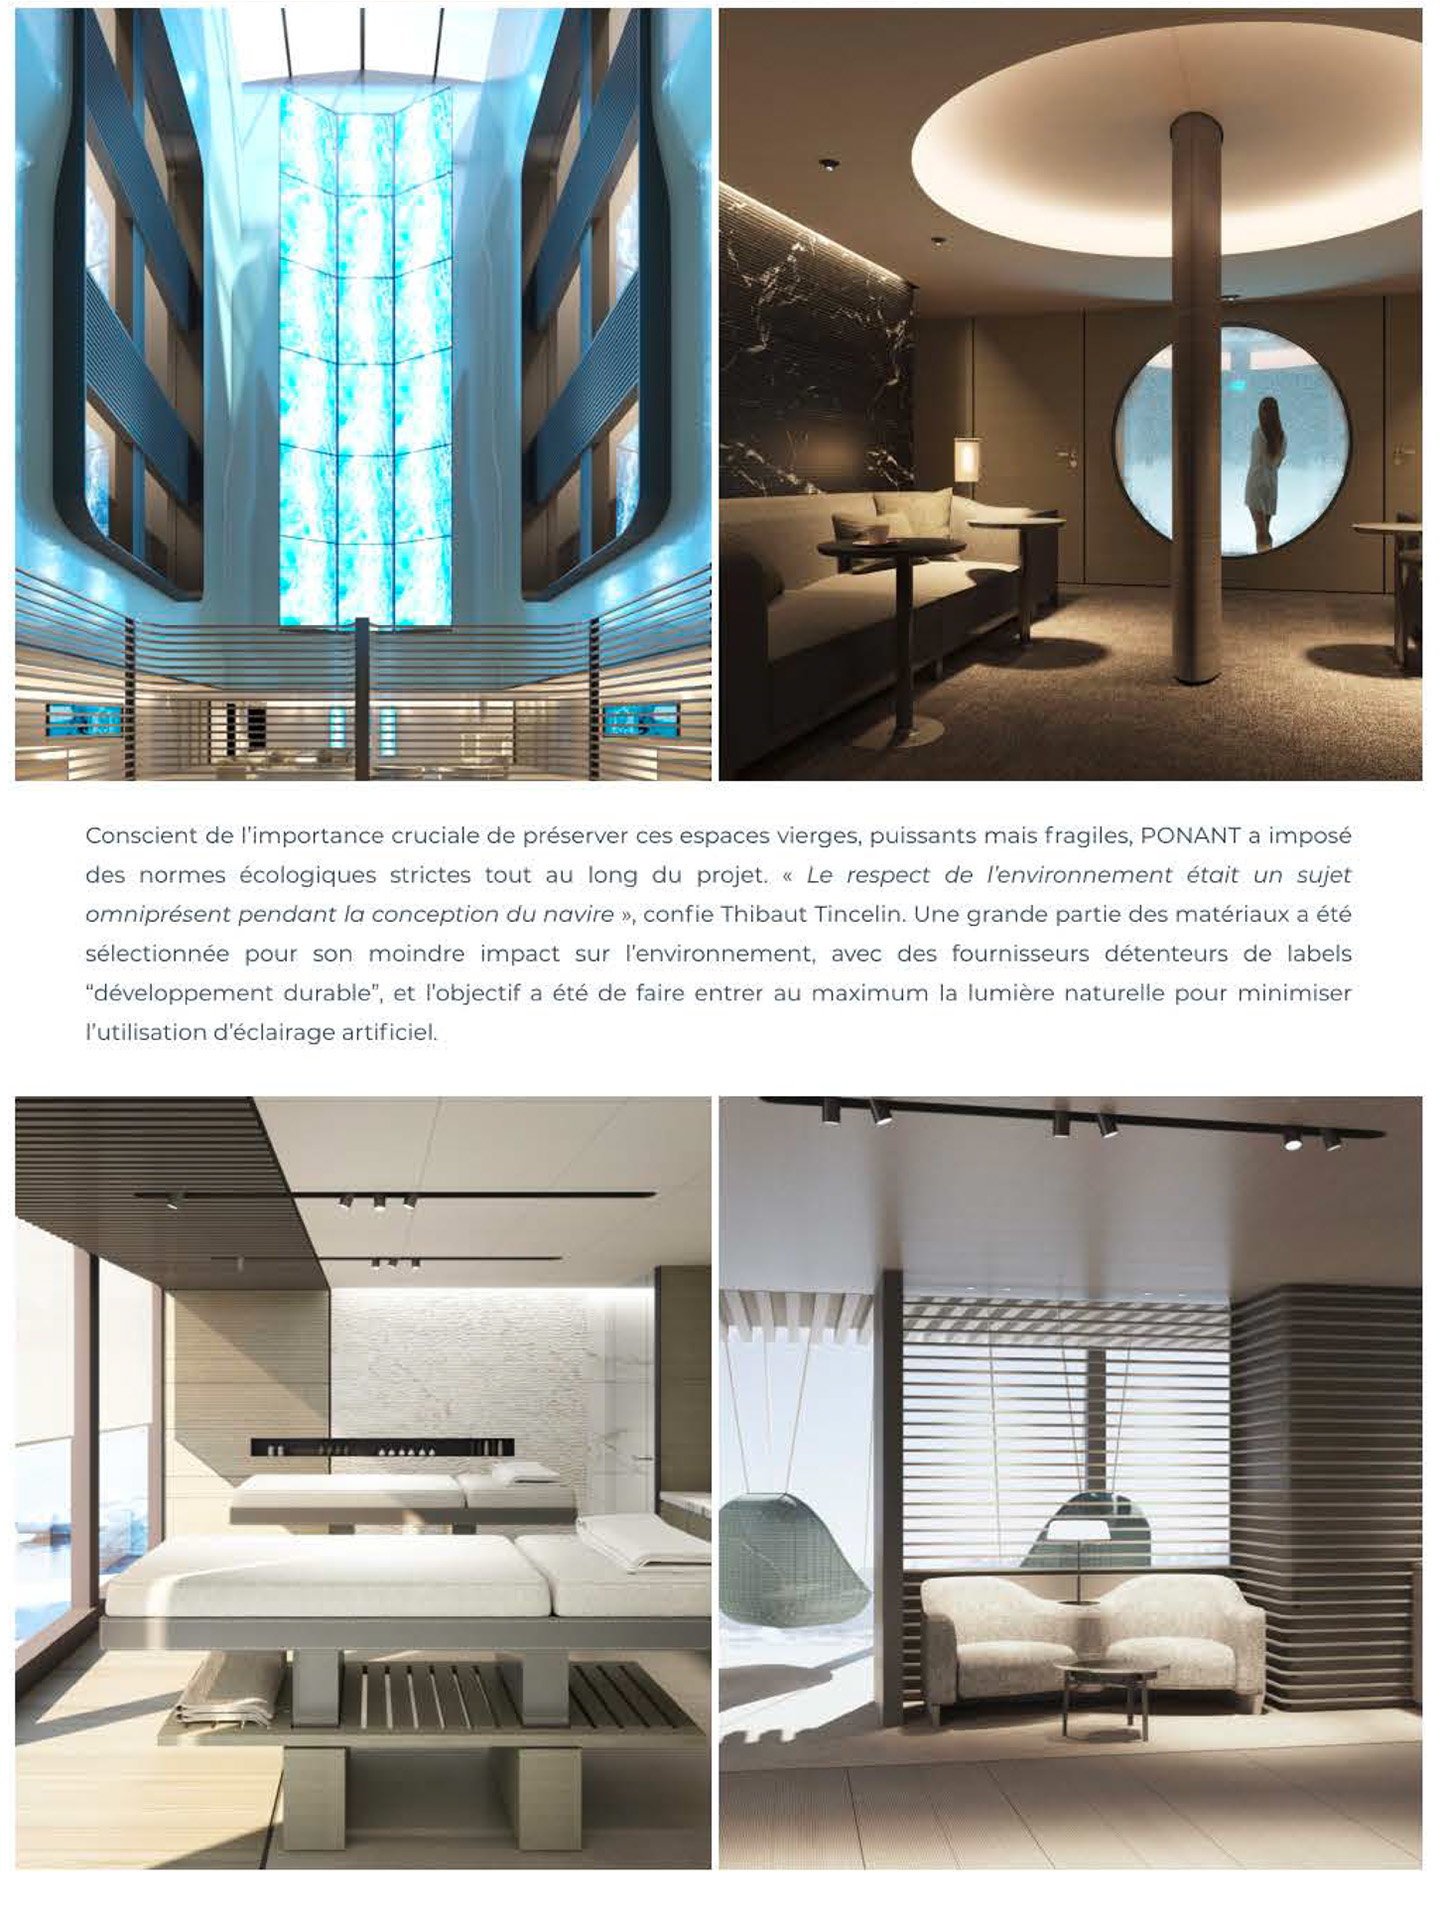 article on commander charcot of ponant, interior design by jean-philippe nuel, luxury polar expedition ship, cruise, luxury ship, interior design